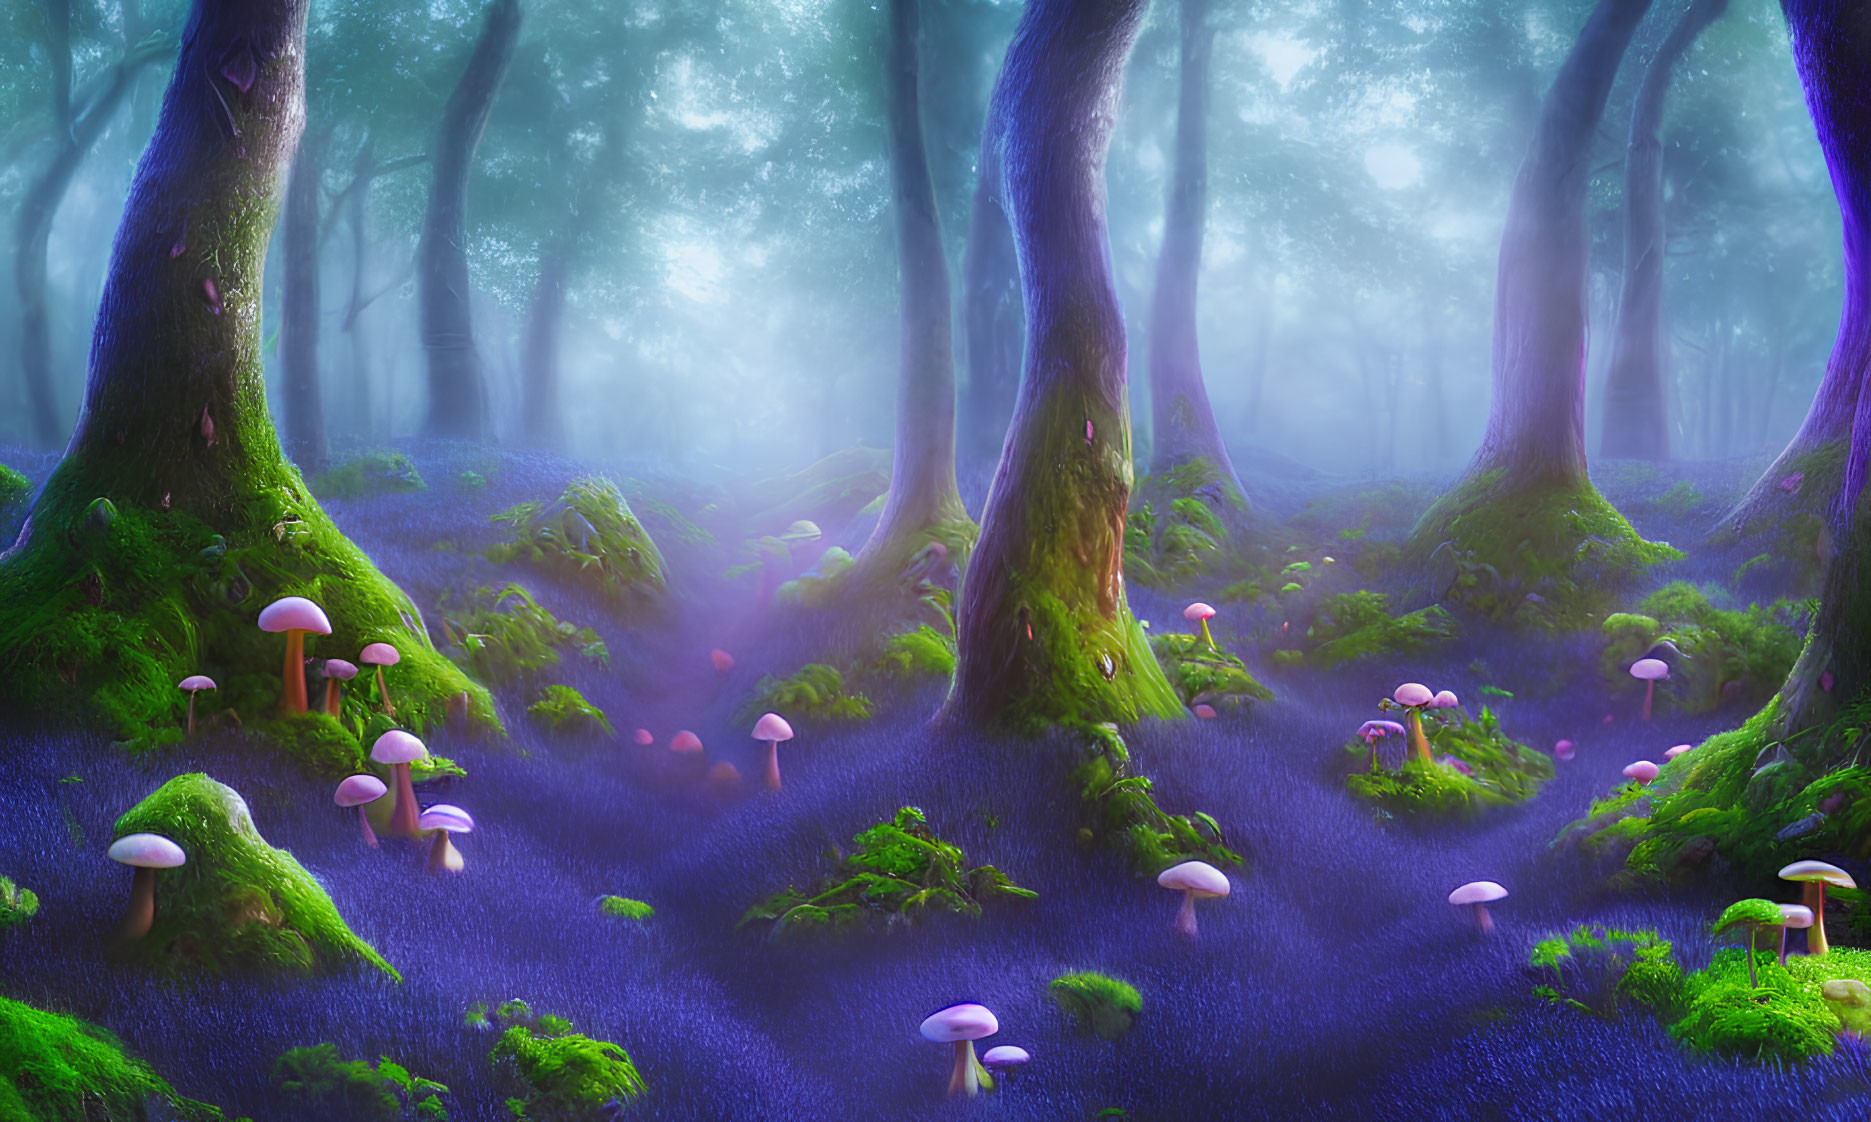 Enchanting forest scene with tall trees, vibrant blue flora, and white mushrooms in ethereal light